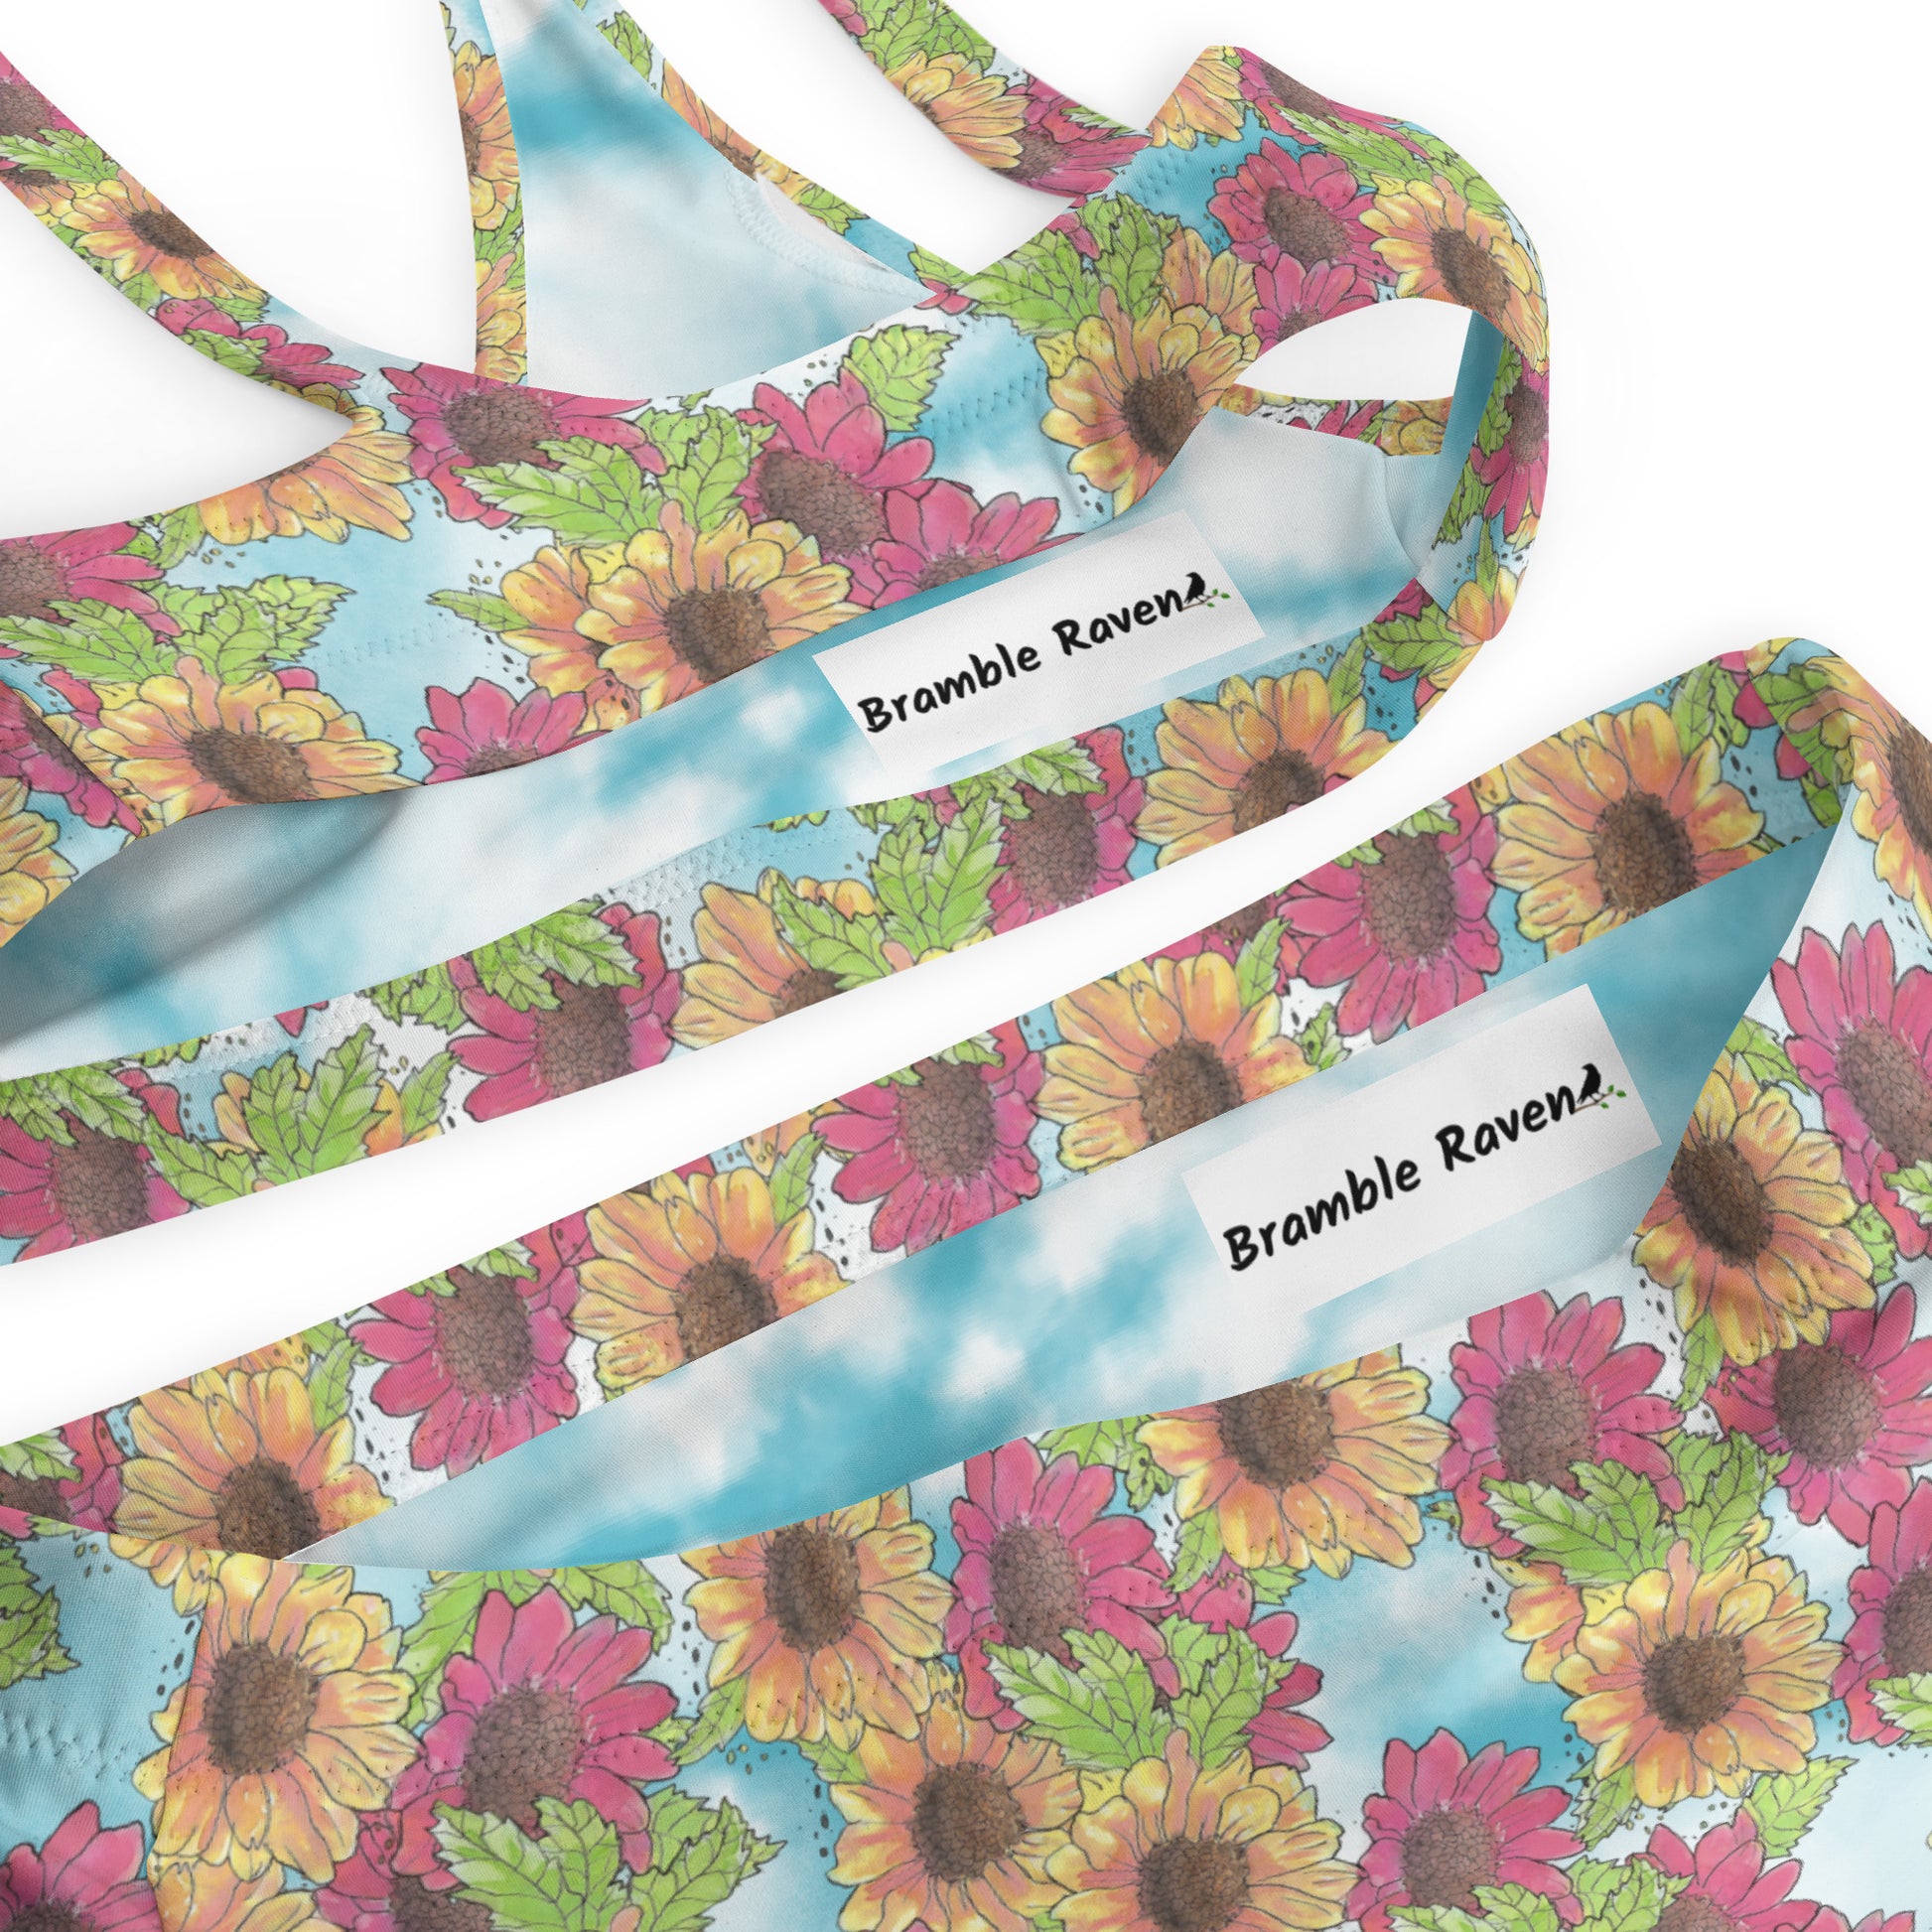 Watercolor Gerber daisy patterned high-waisted bikini. Made from recycled polyester and spandex. Features removable pads and double layers. Detail view of inside printed label.